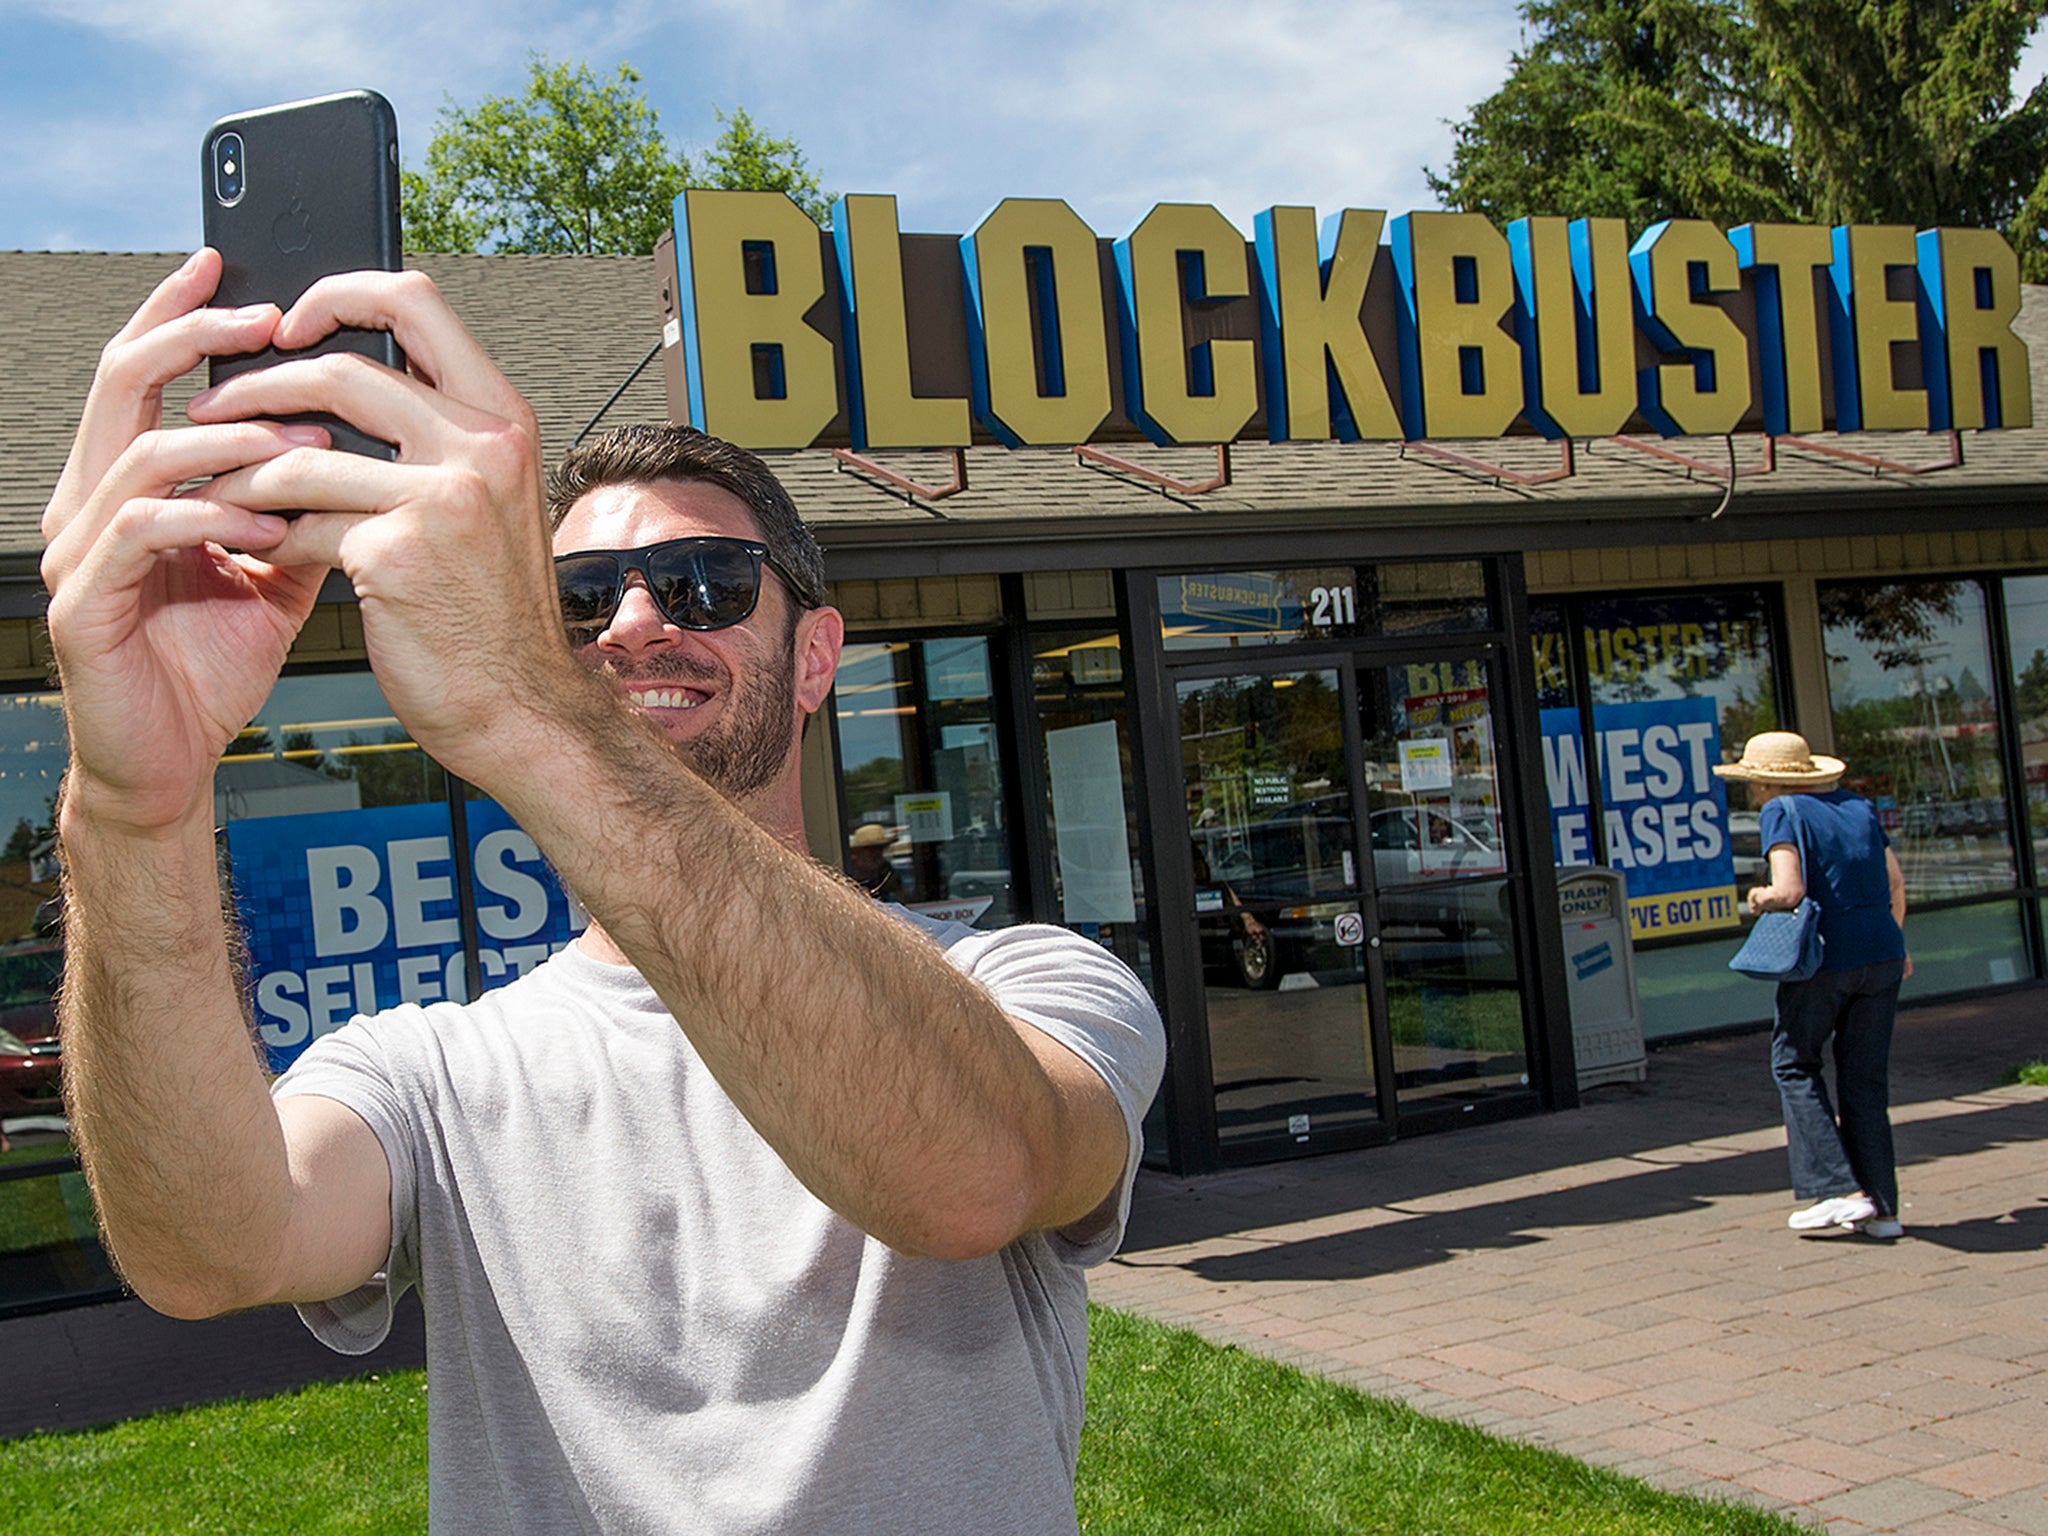 The Blockbuster store in Bend, Oregon, is to become the last in the world